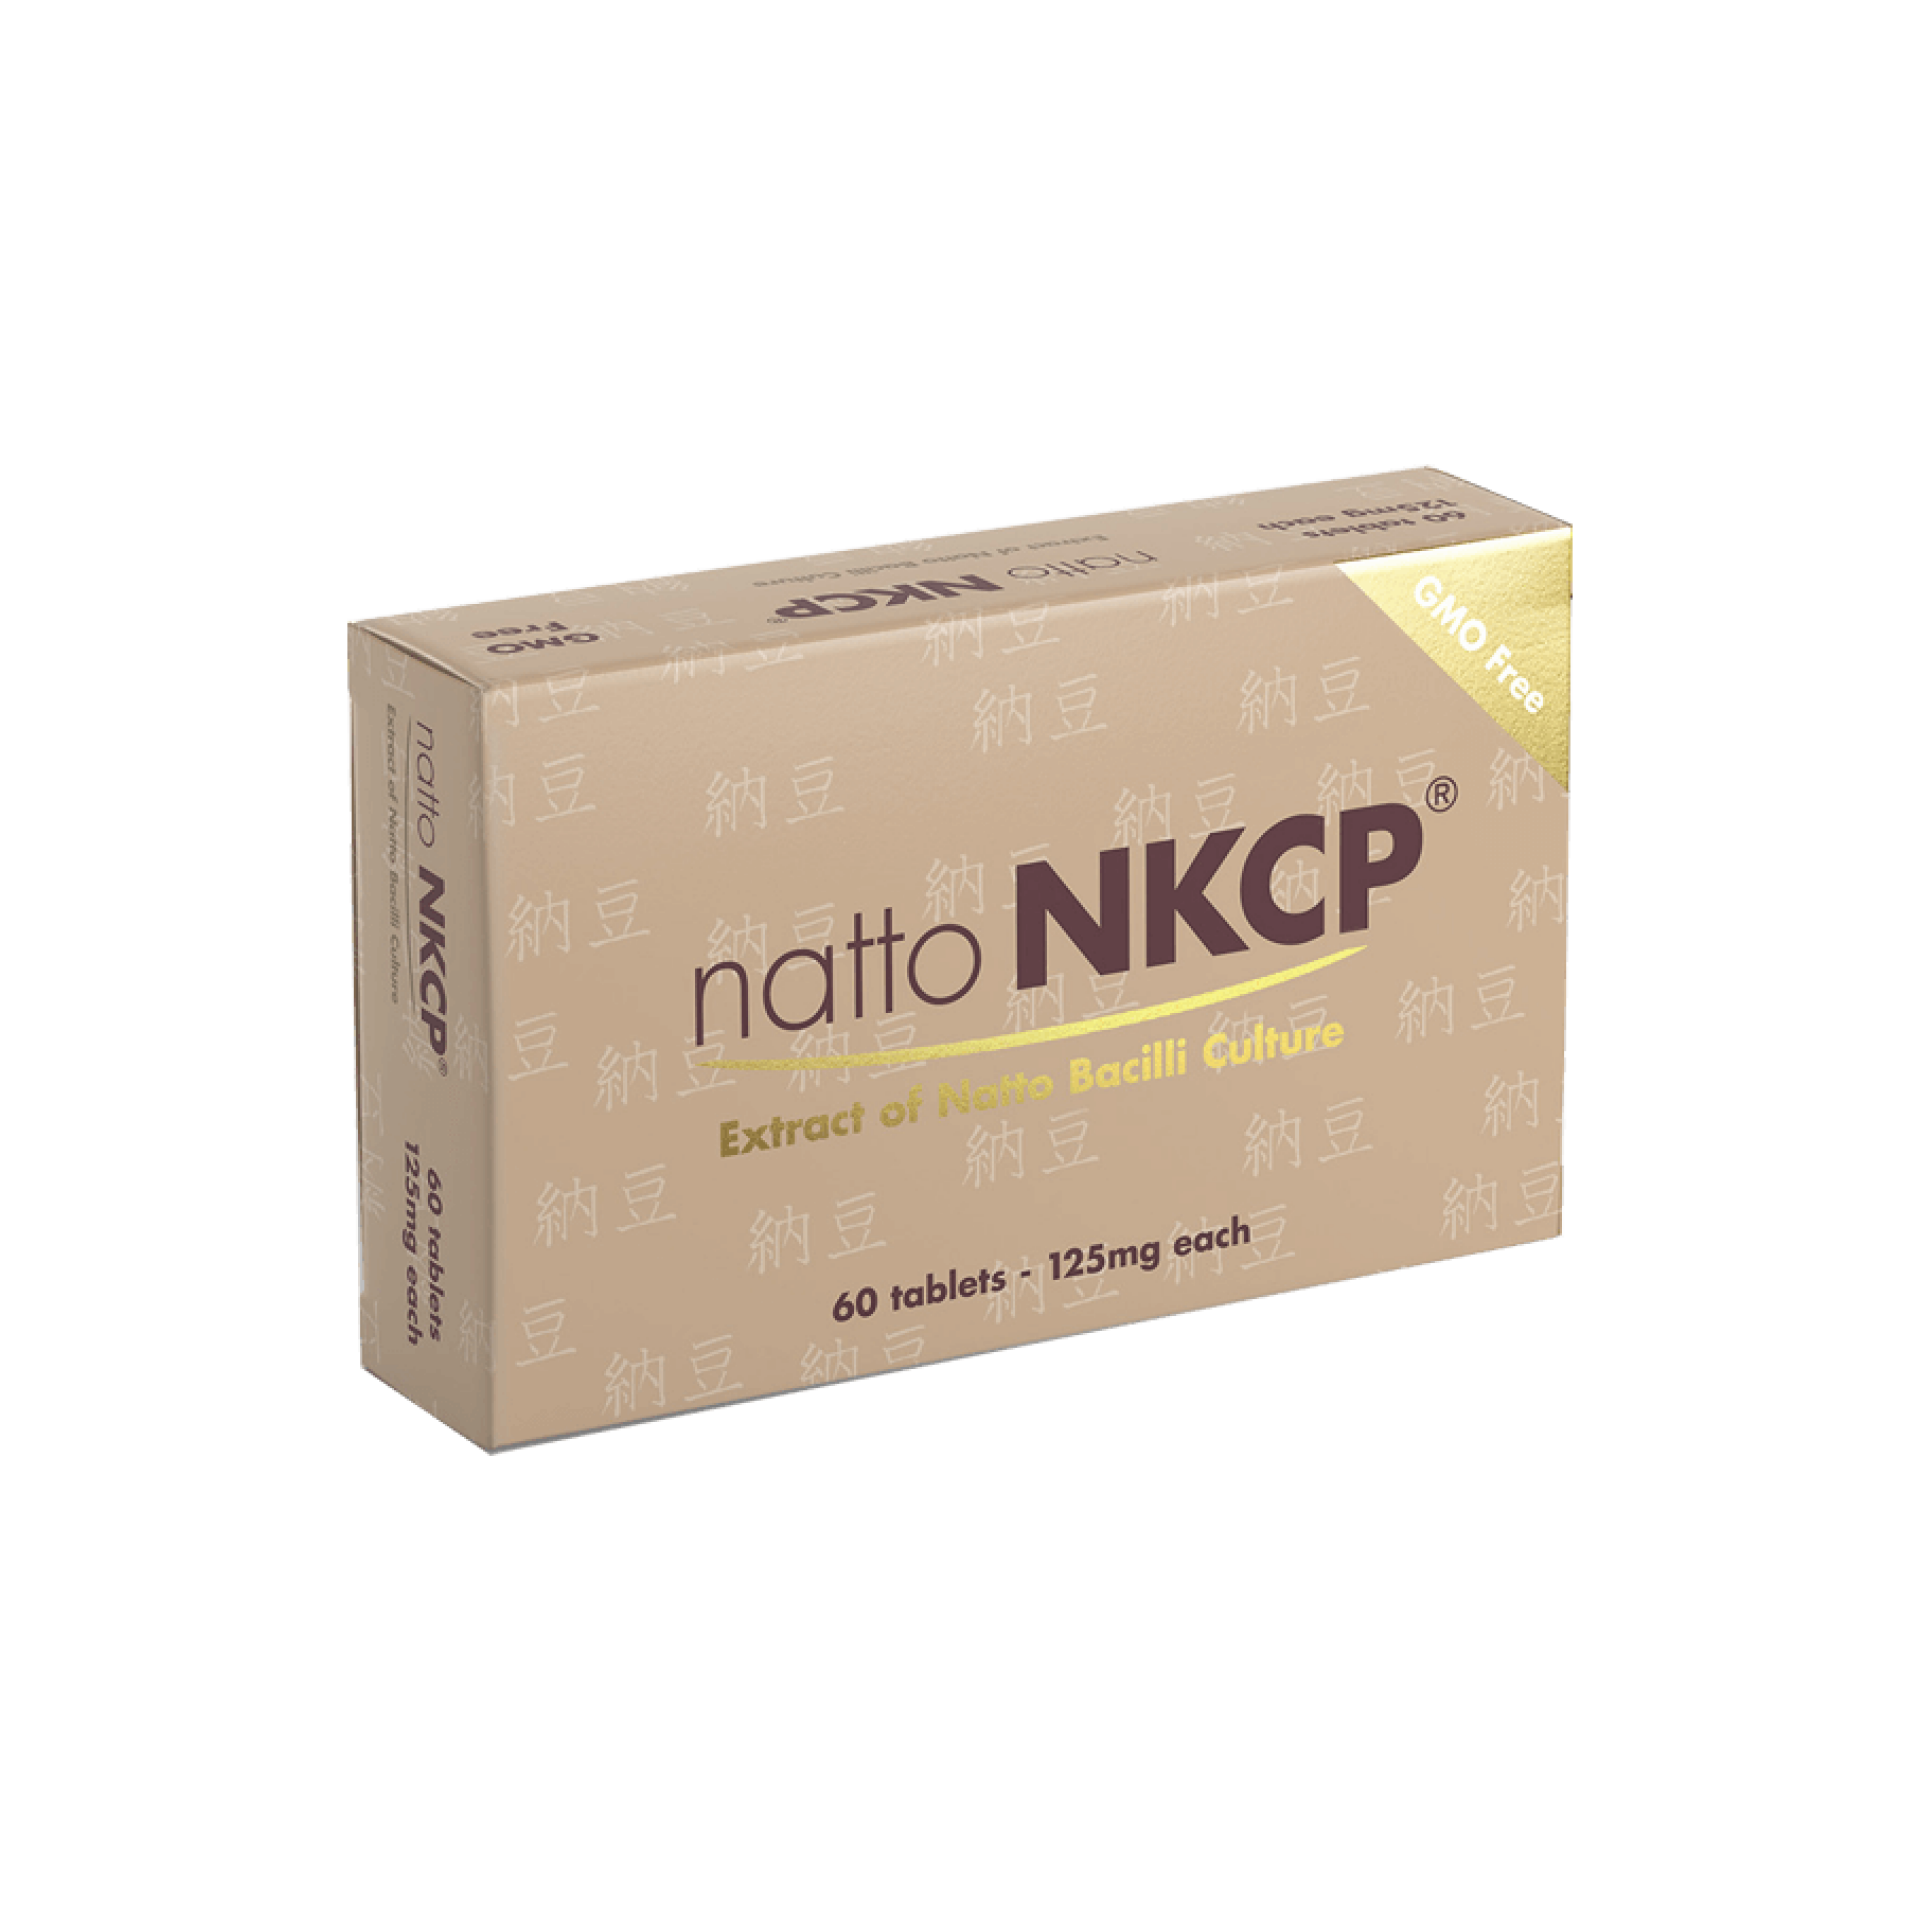 Natto NKCP package front view